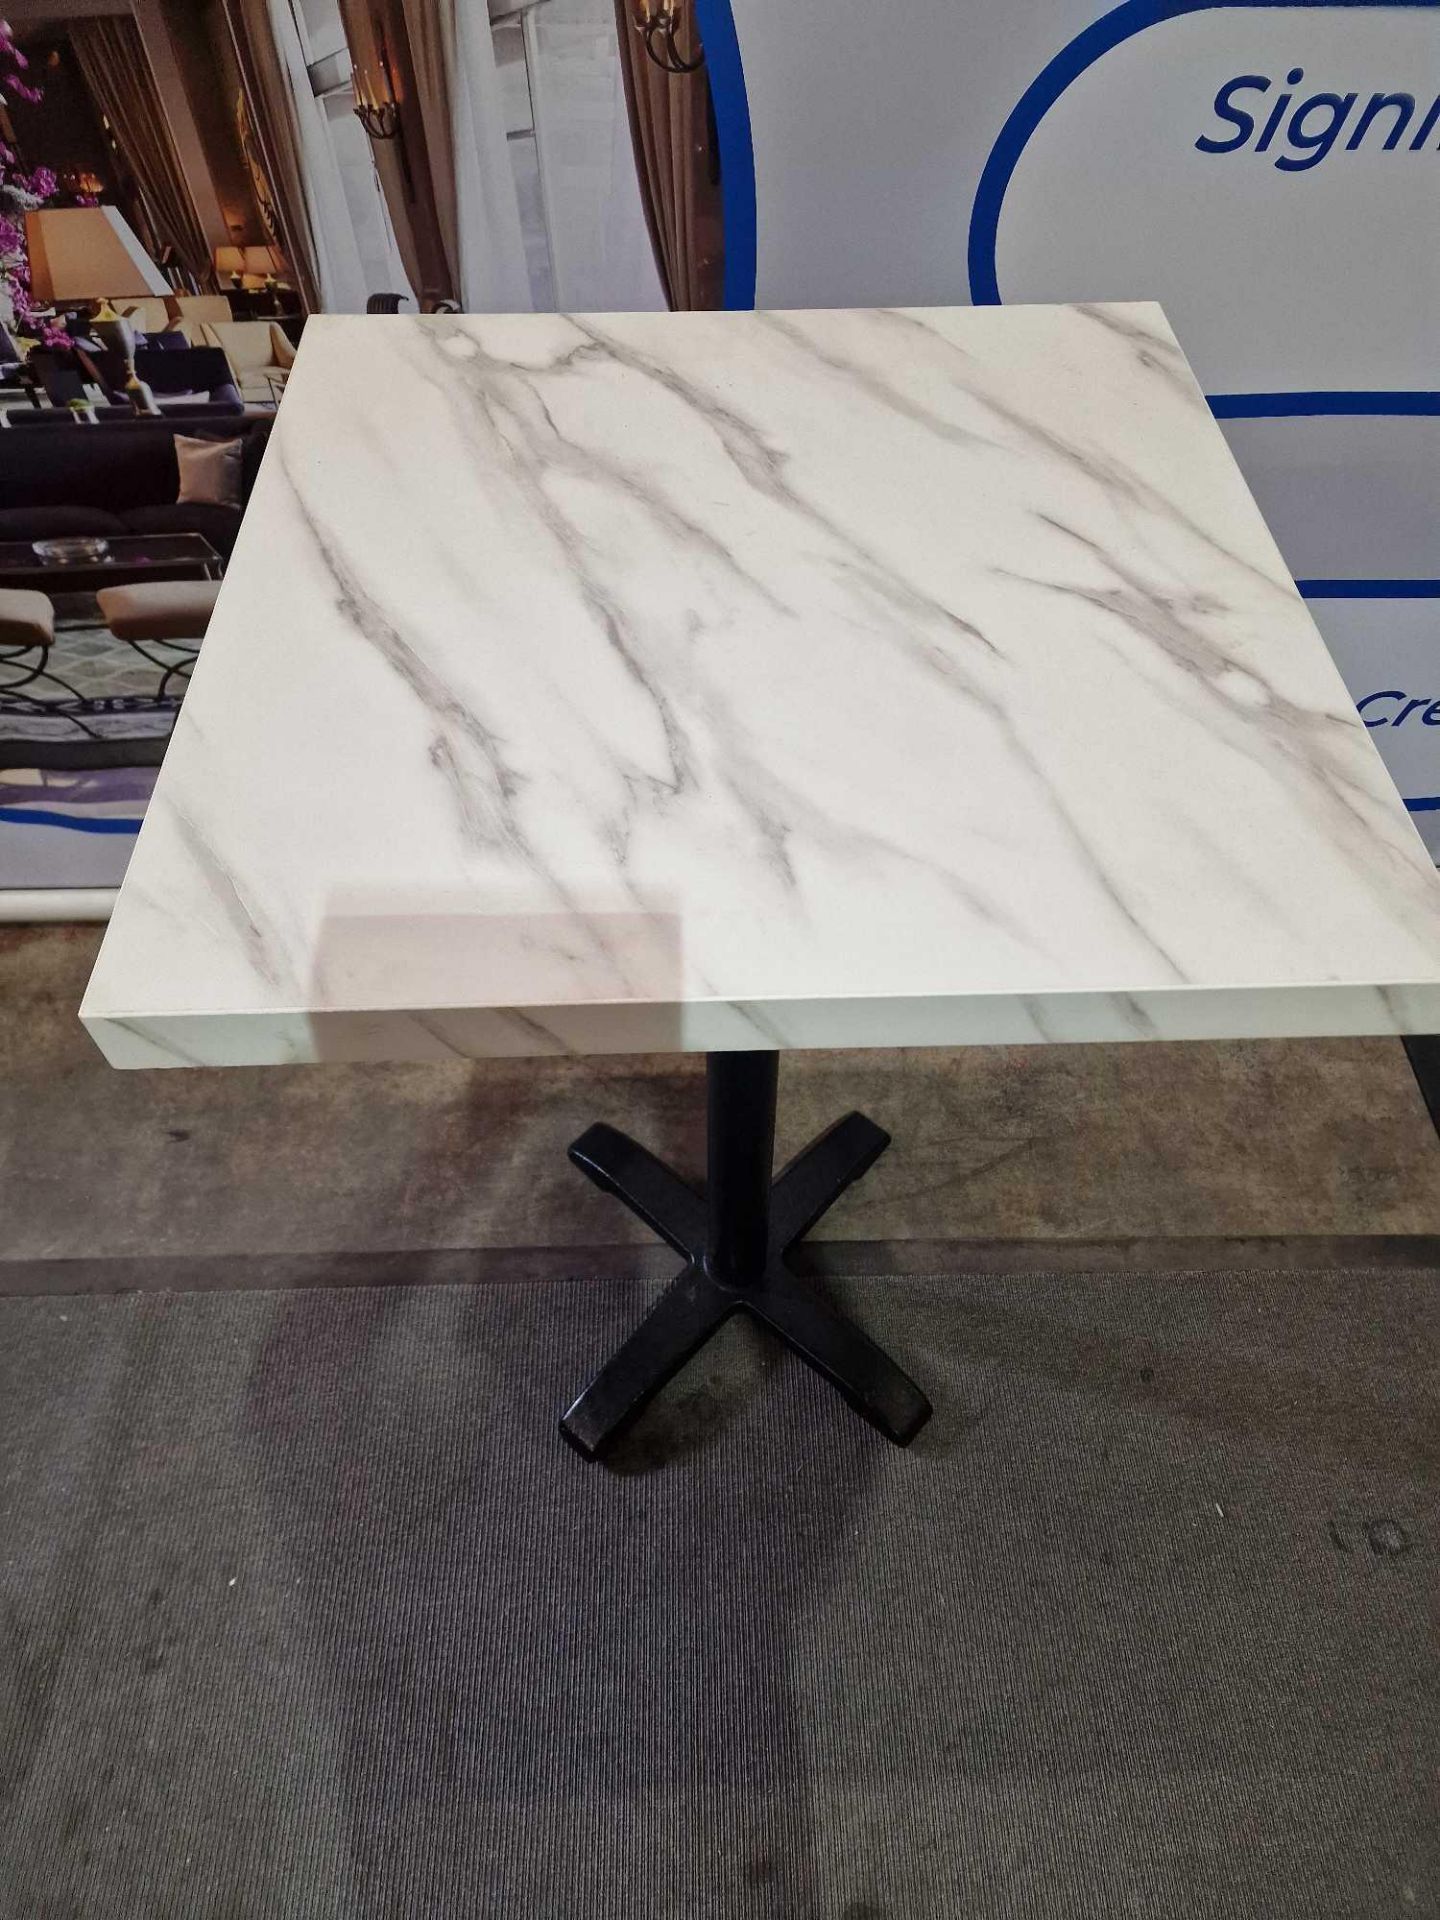 Bolero square poser table faux marble top poser table on black powder coated pedestal 70 x 70 x